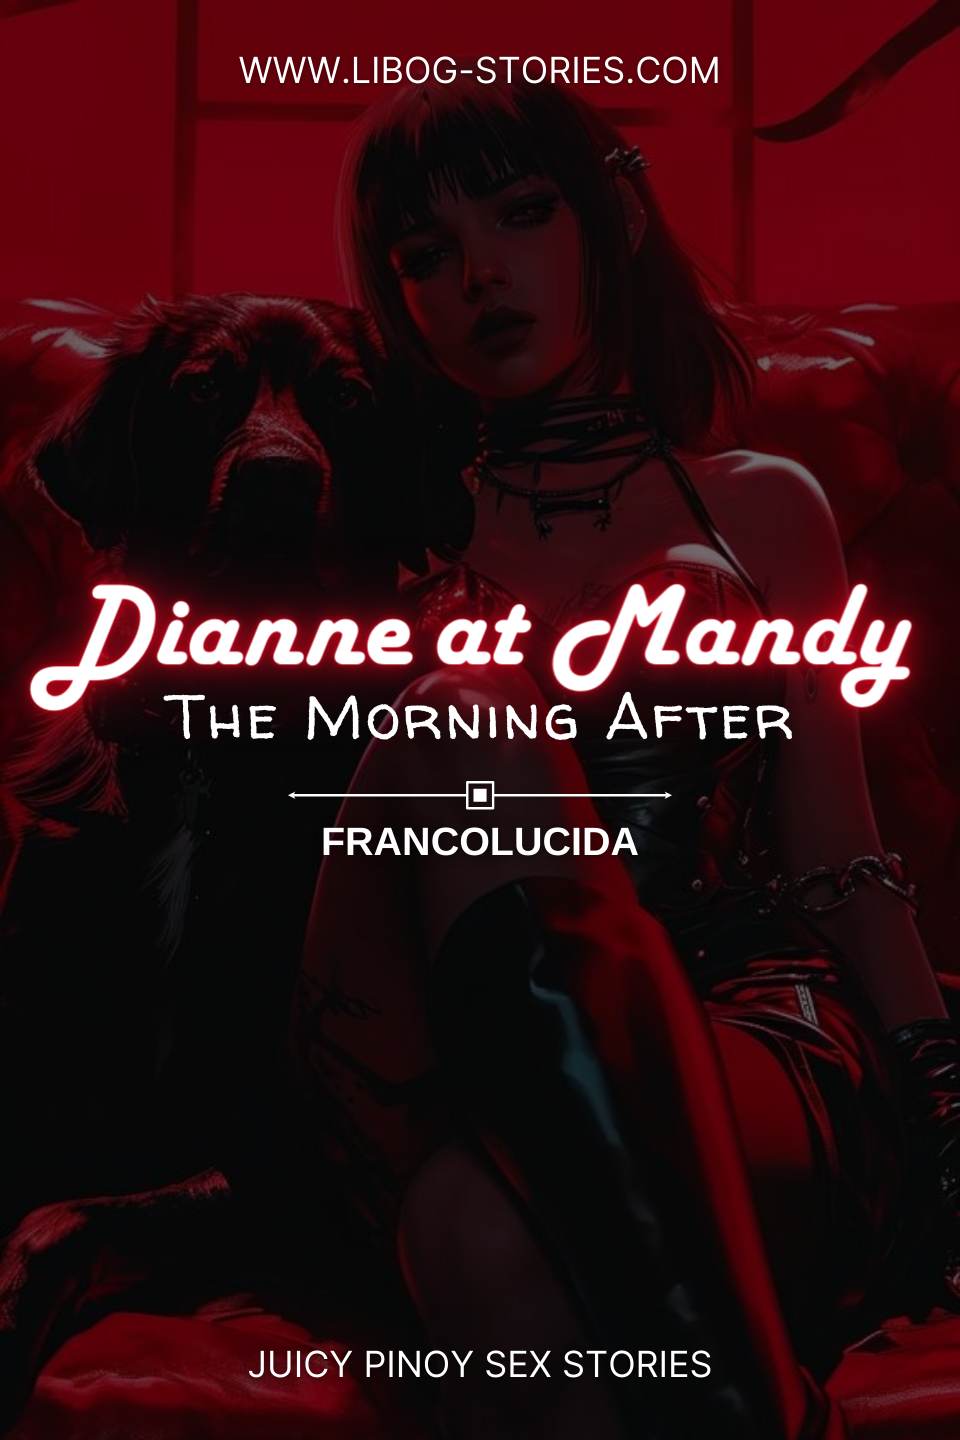 Dianne at Mandy The Morning After